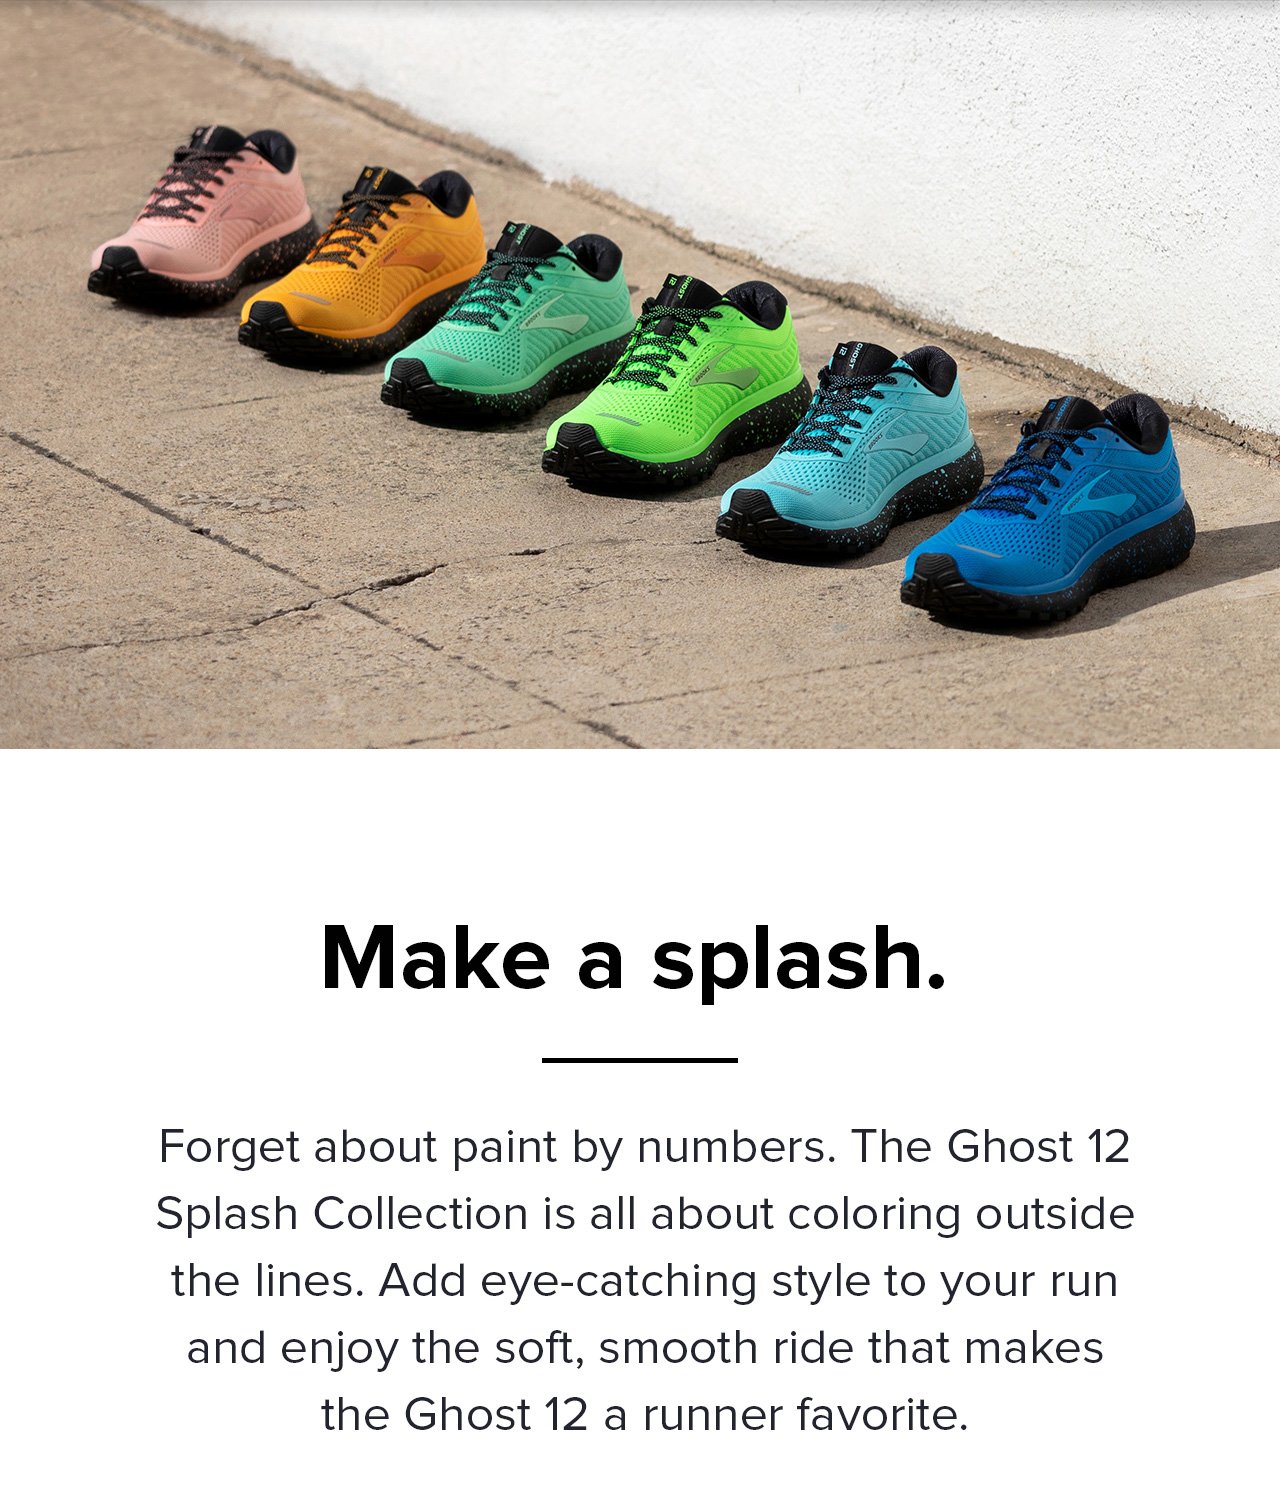 Meet the new Ghost 12 Splash Collection 